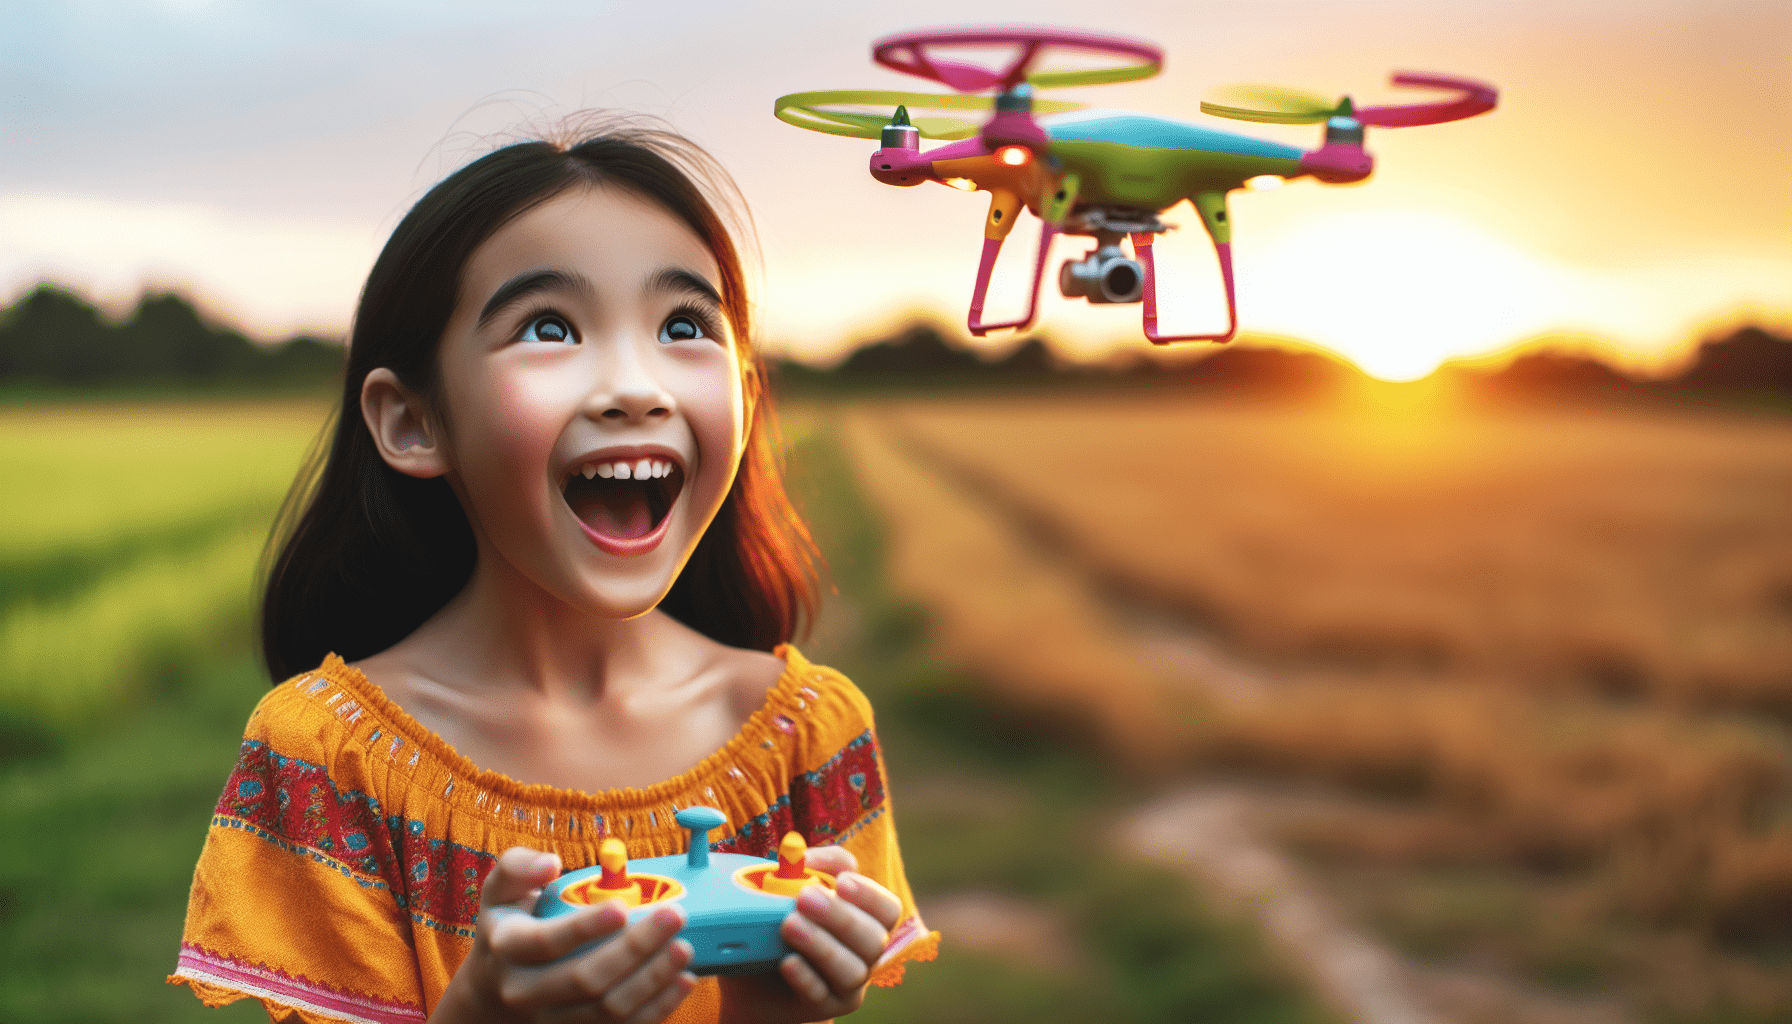 Is Drone Good For Kids?